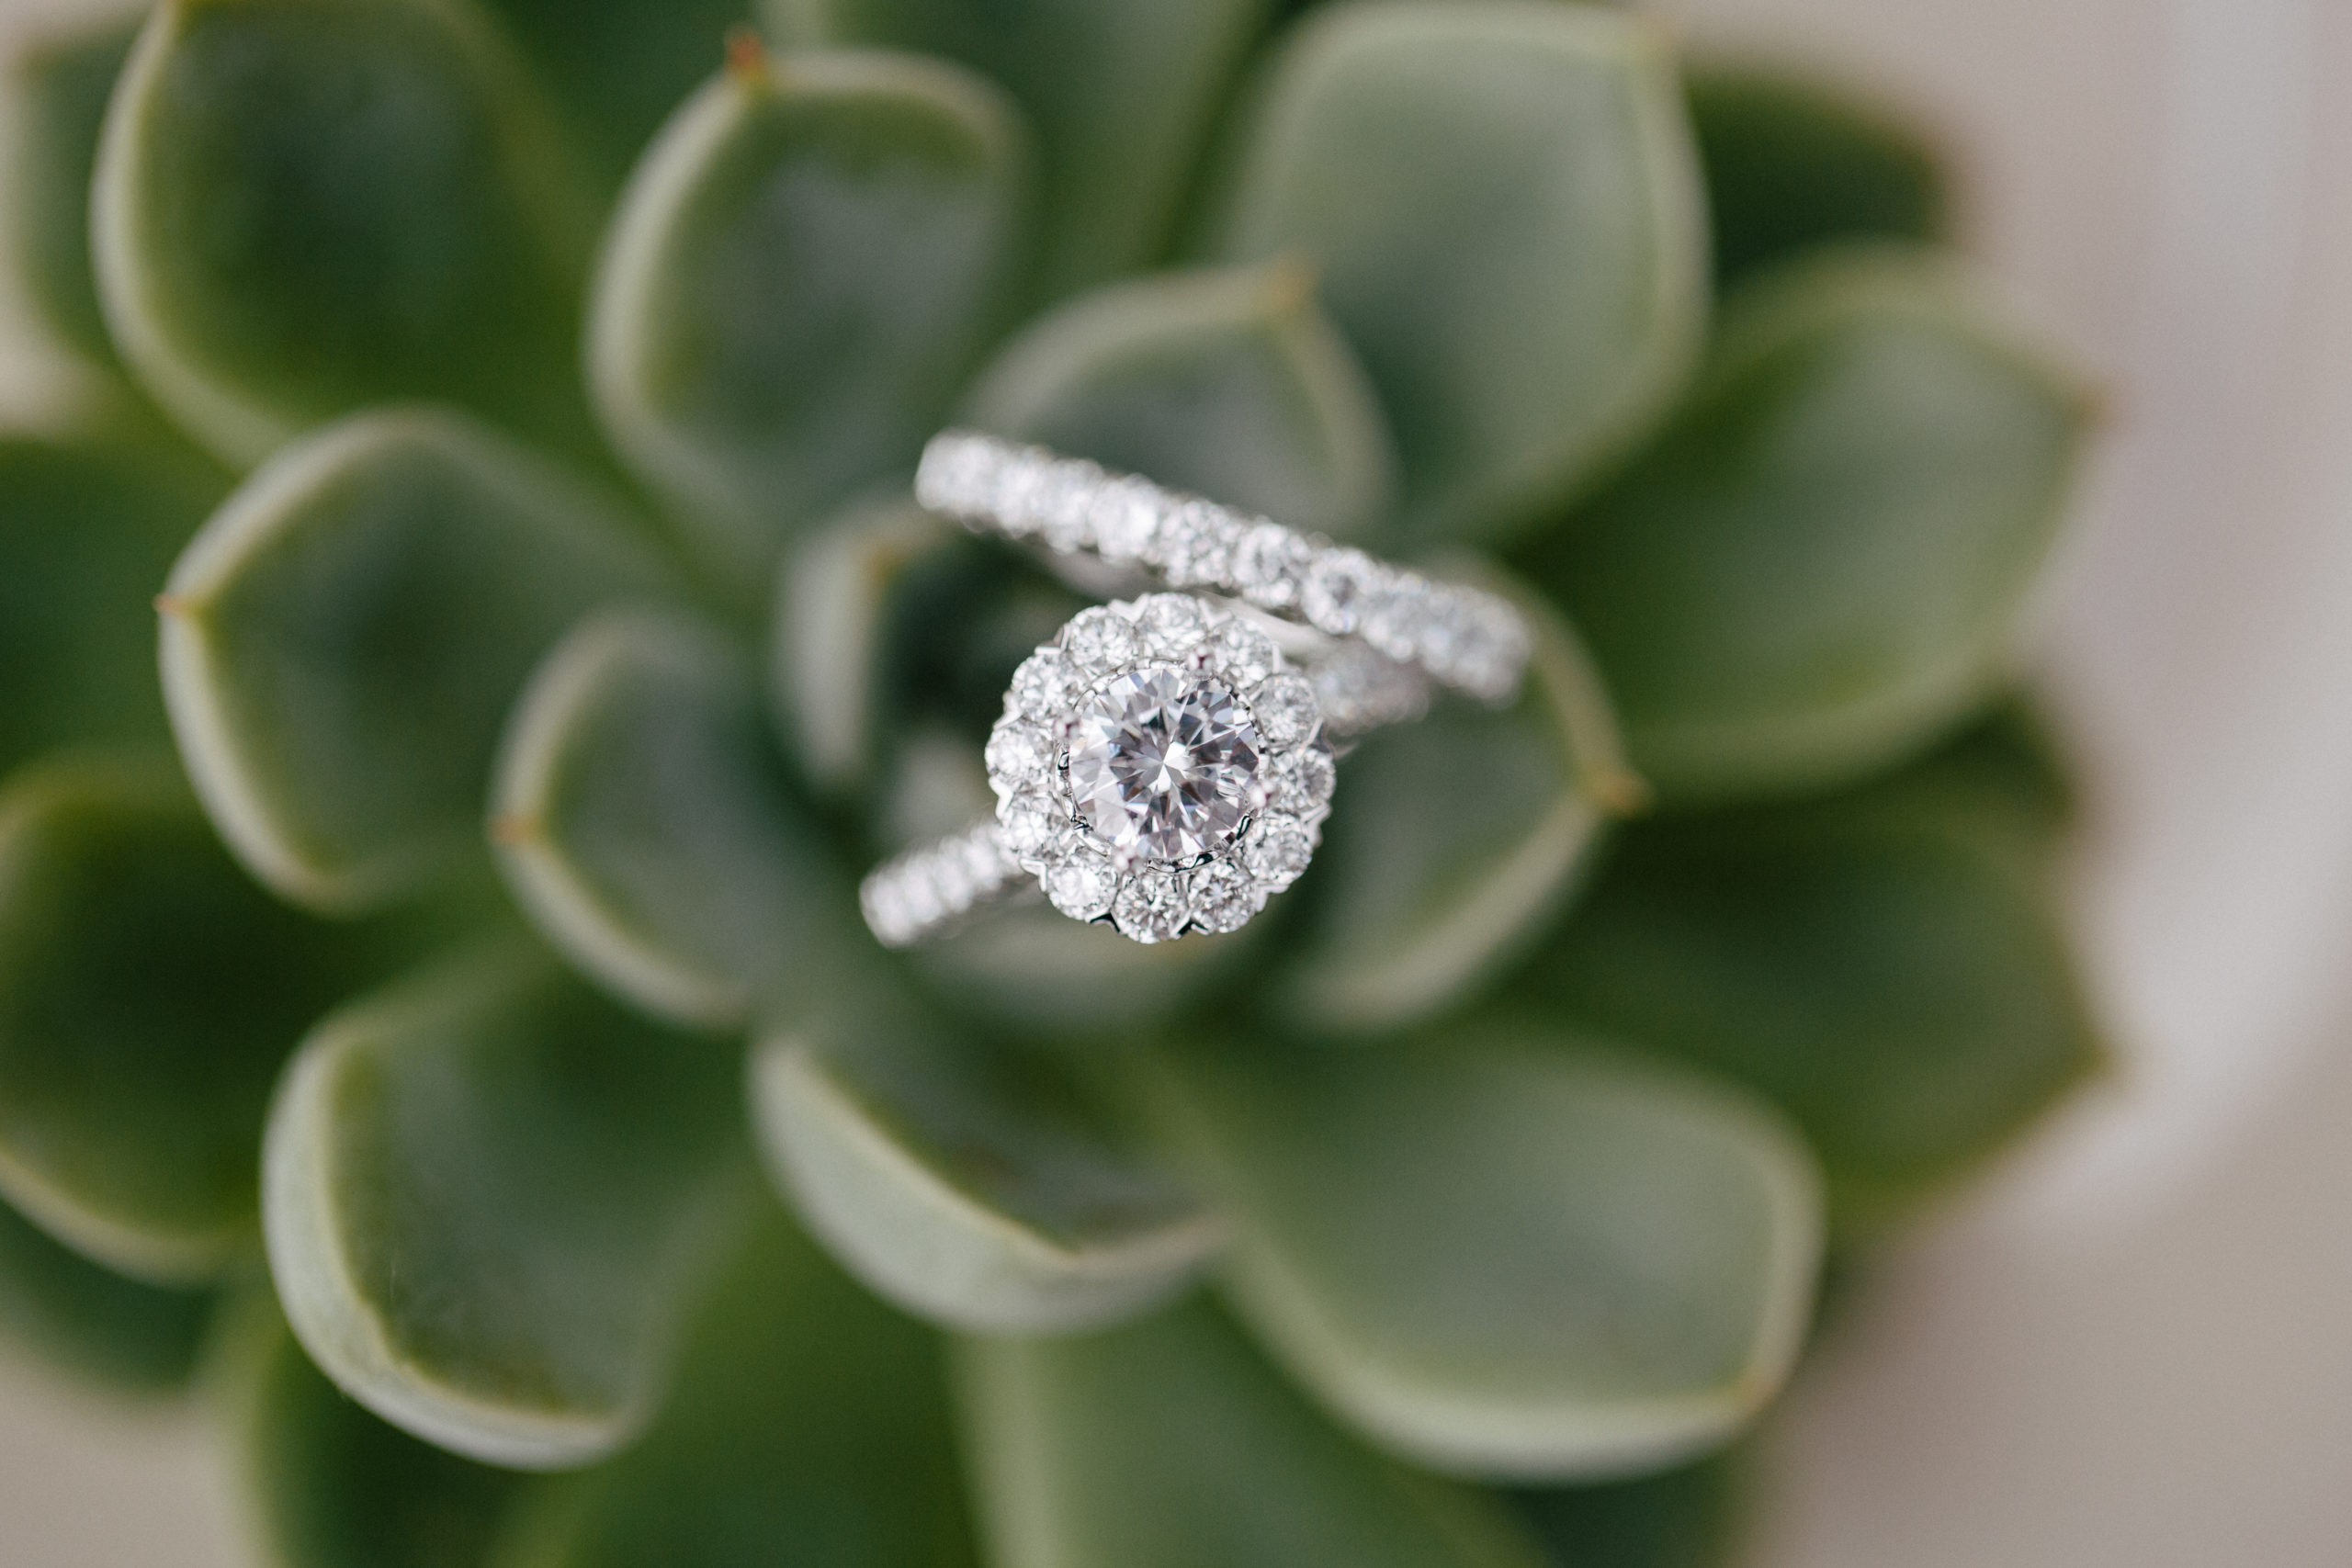 For a truly unique, 2 carat engagement ring, Matthews Jewelers in Plantation created this custom round cut ring with diamond halo that would make any newly engaged woman squeal with joy